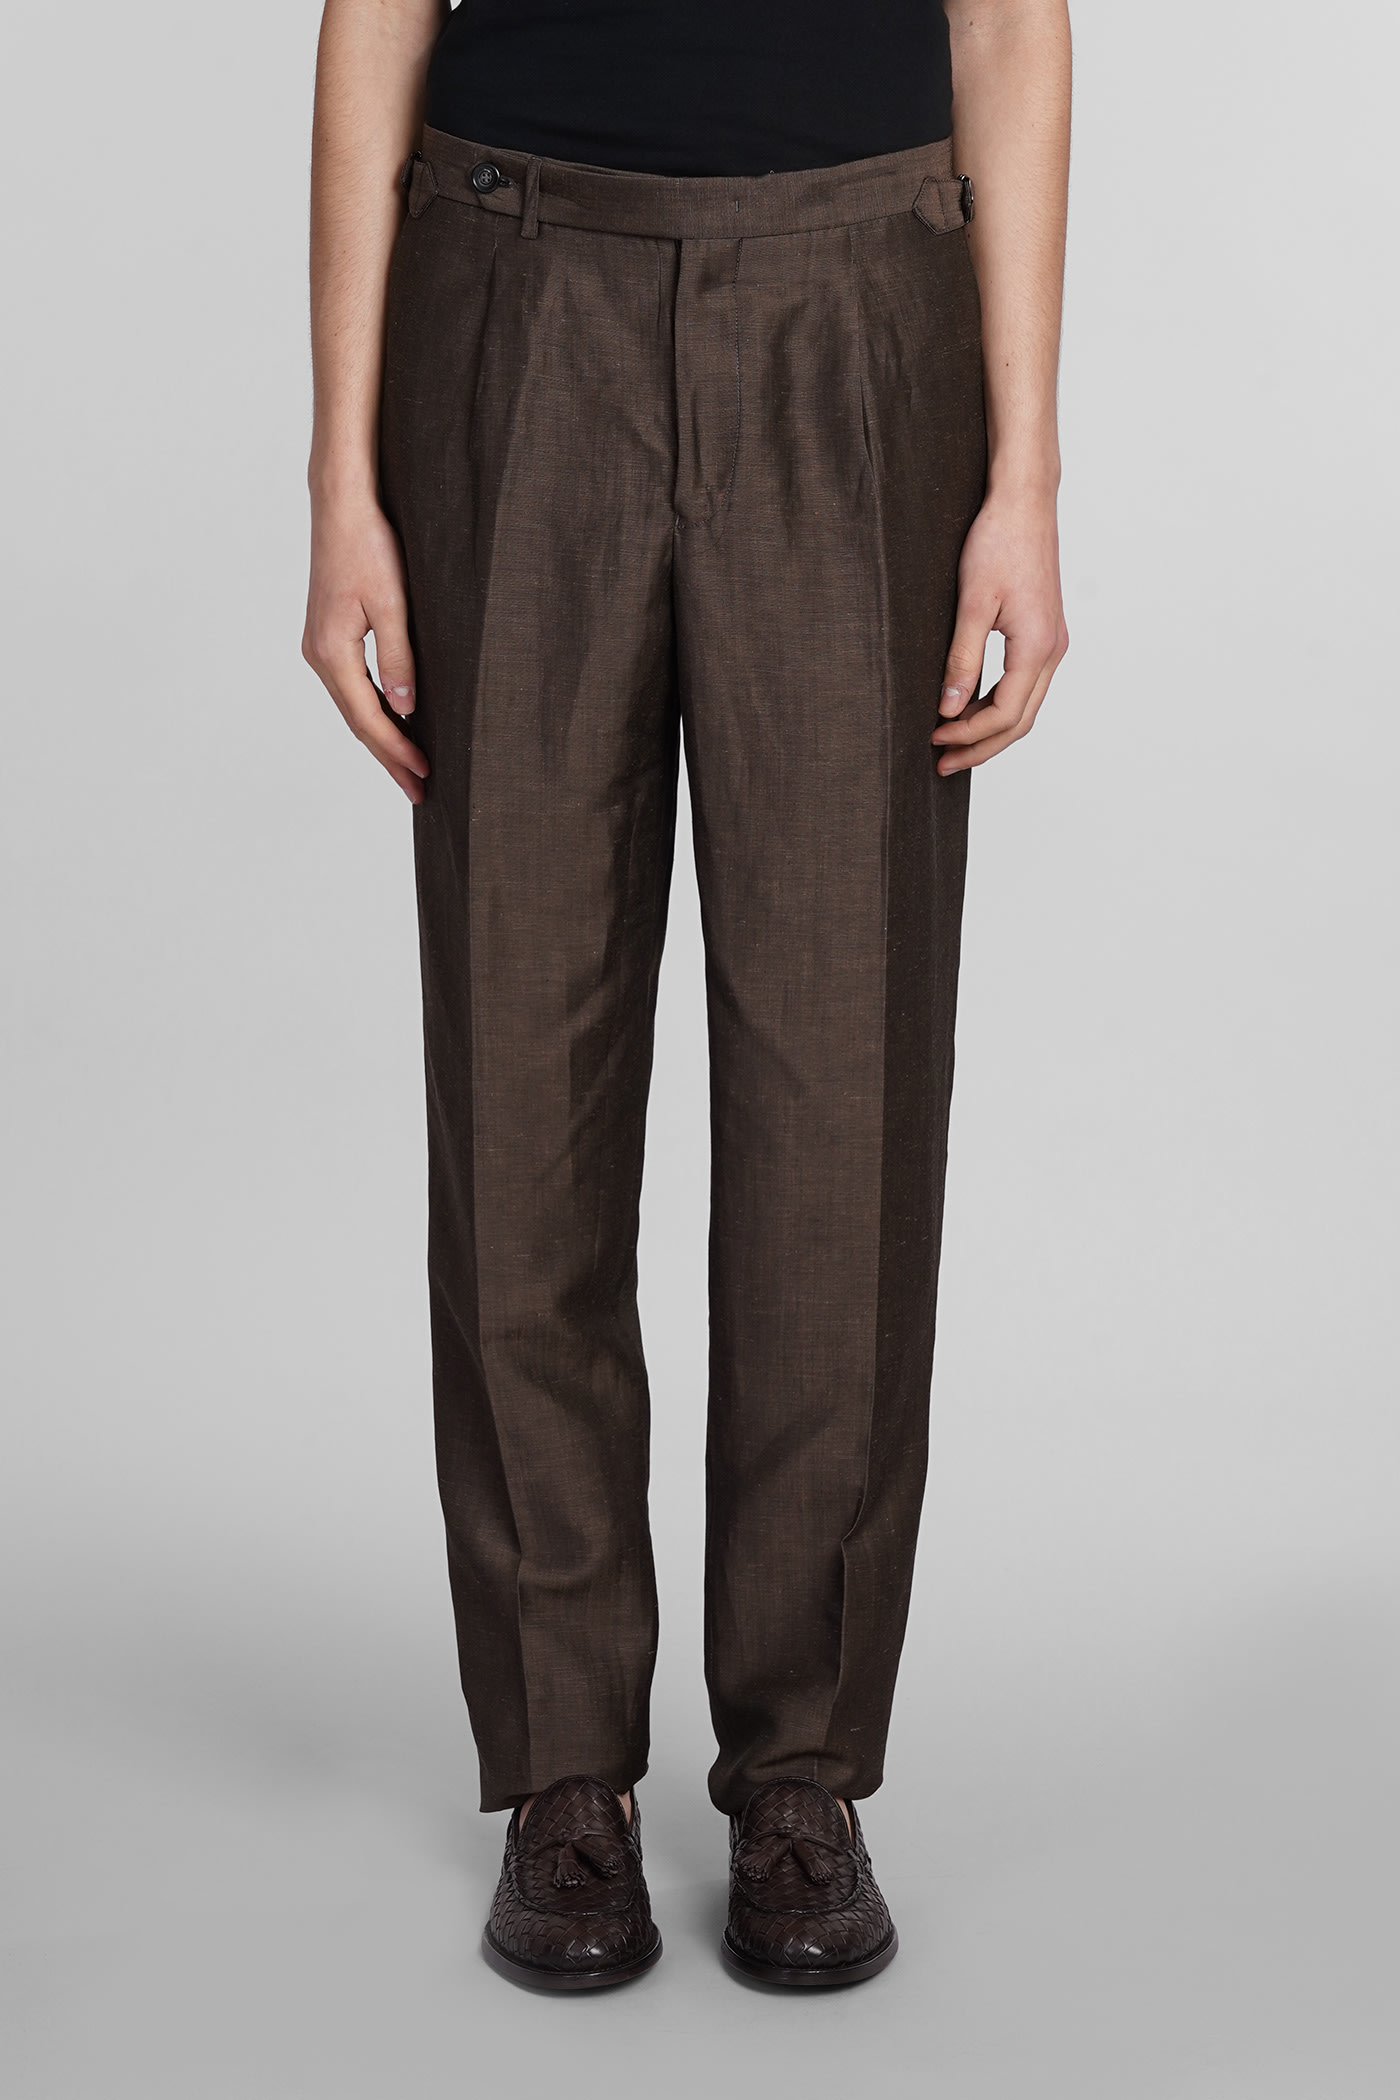 Emporio Armani Trousers In Brown Wool